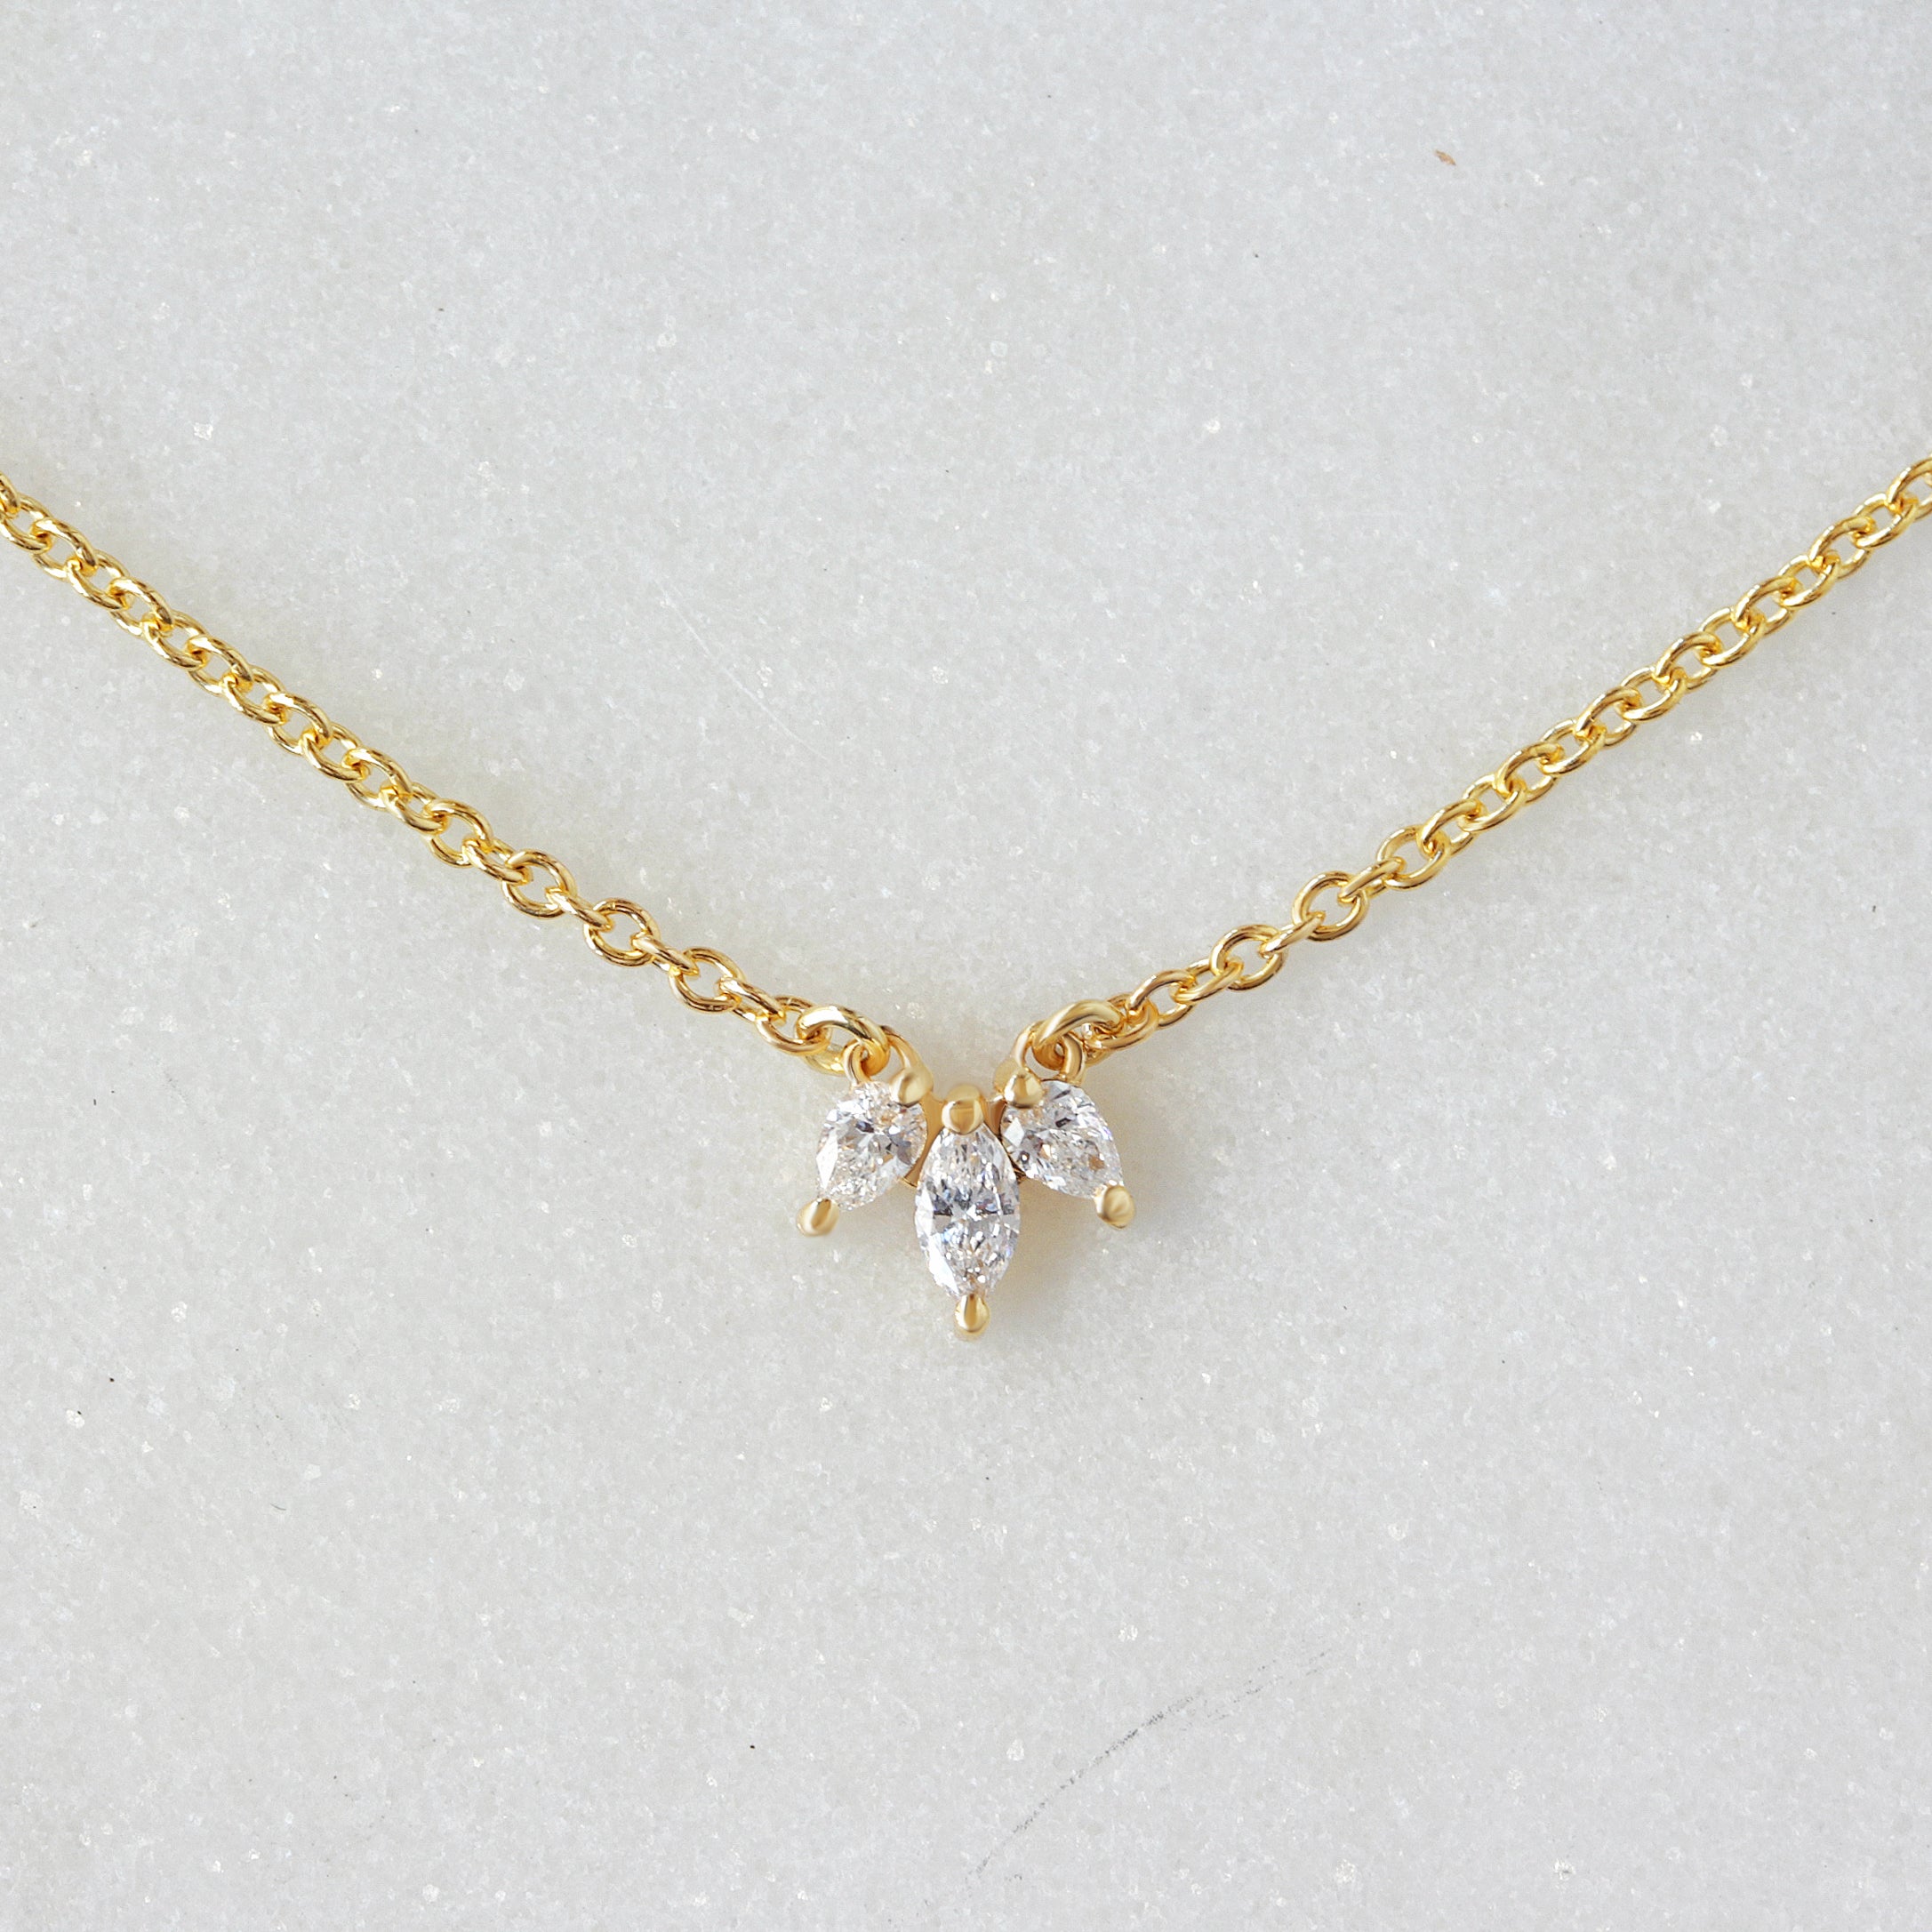 Marquise and Pear Diamonds Minimal Dainty Unique Necklace - Jenny ♥